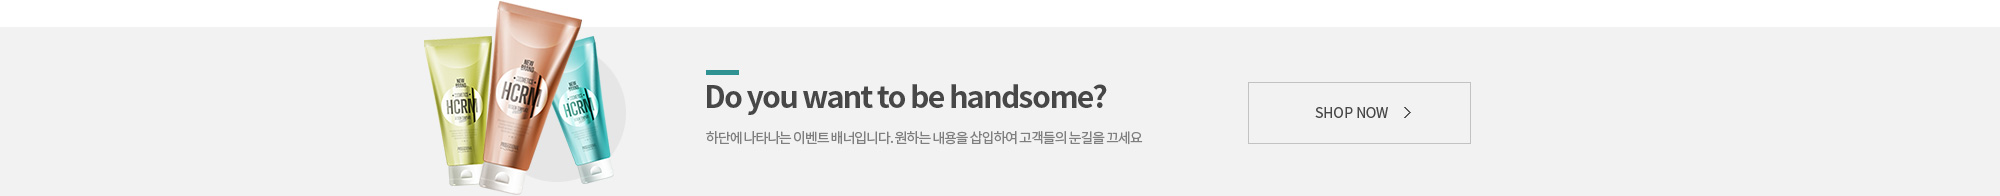 Do you want to be handsome?